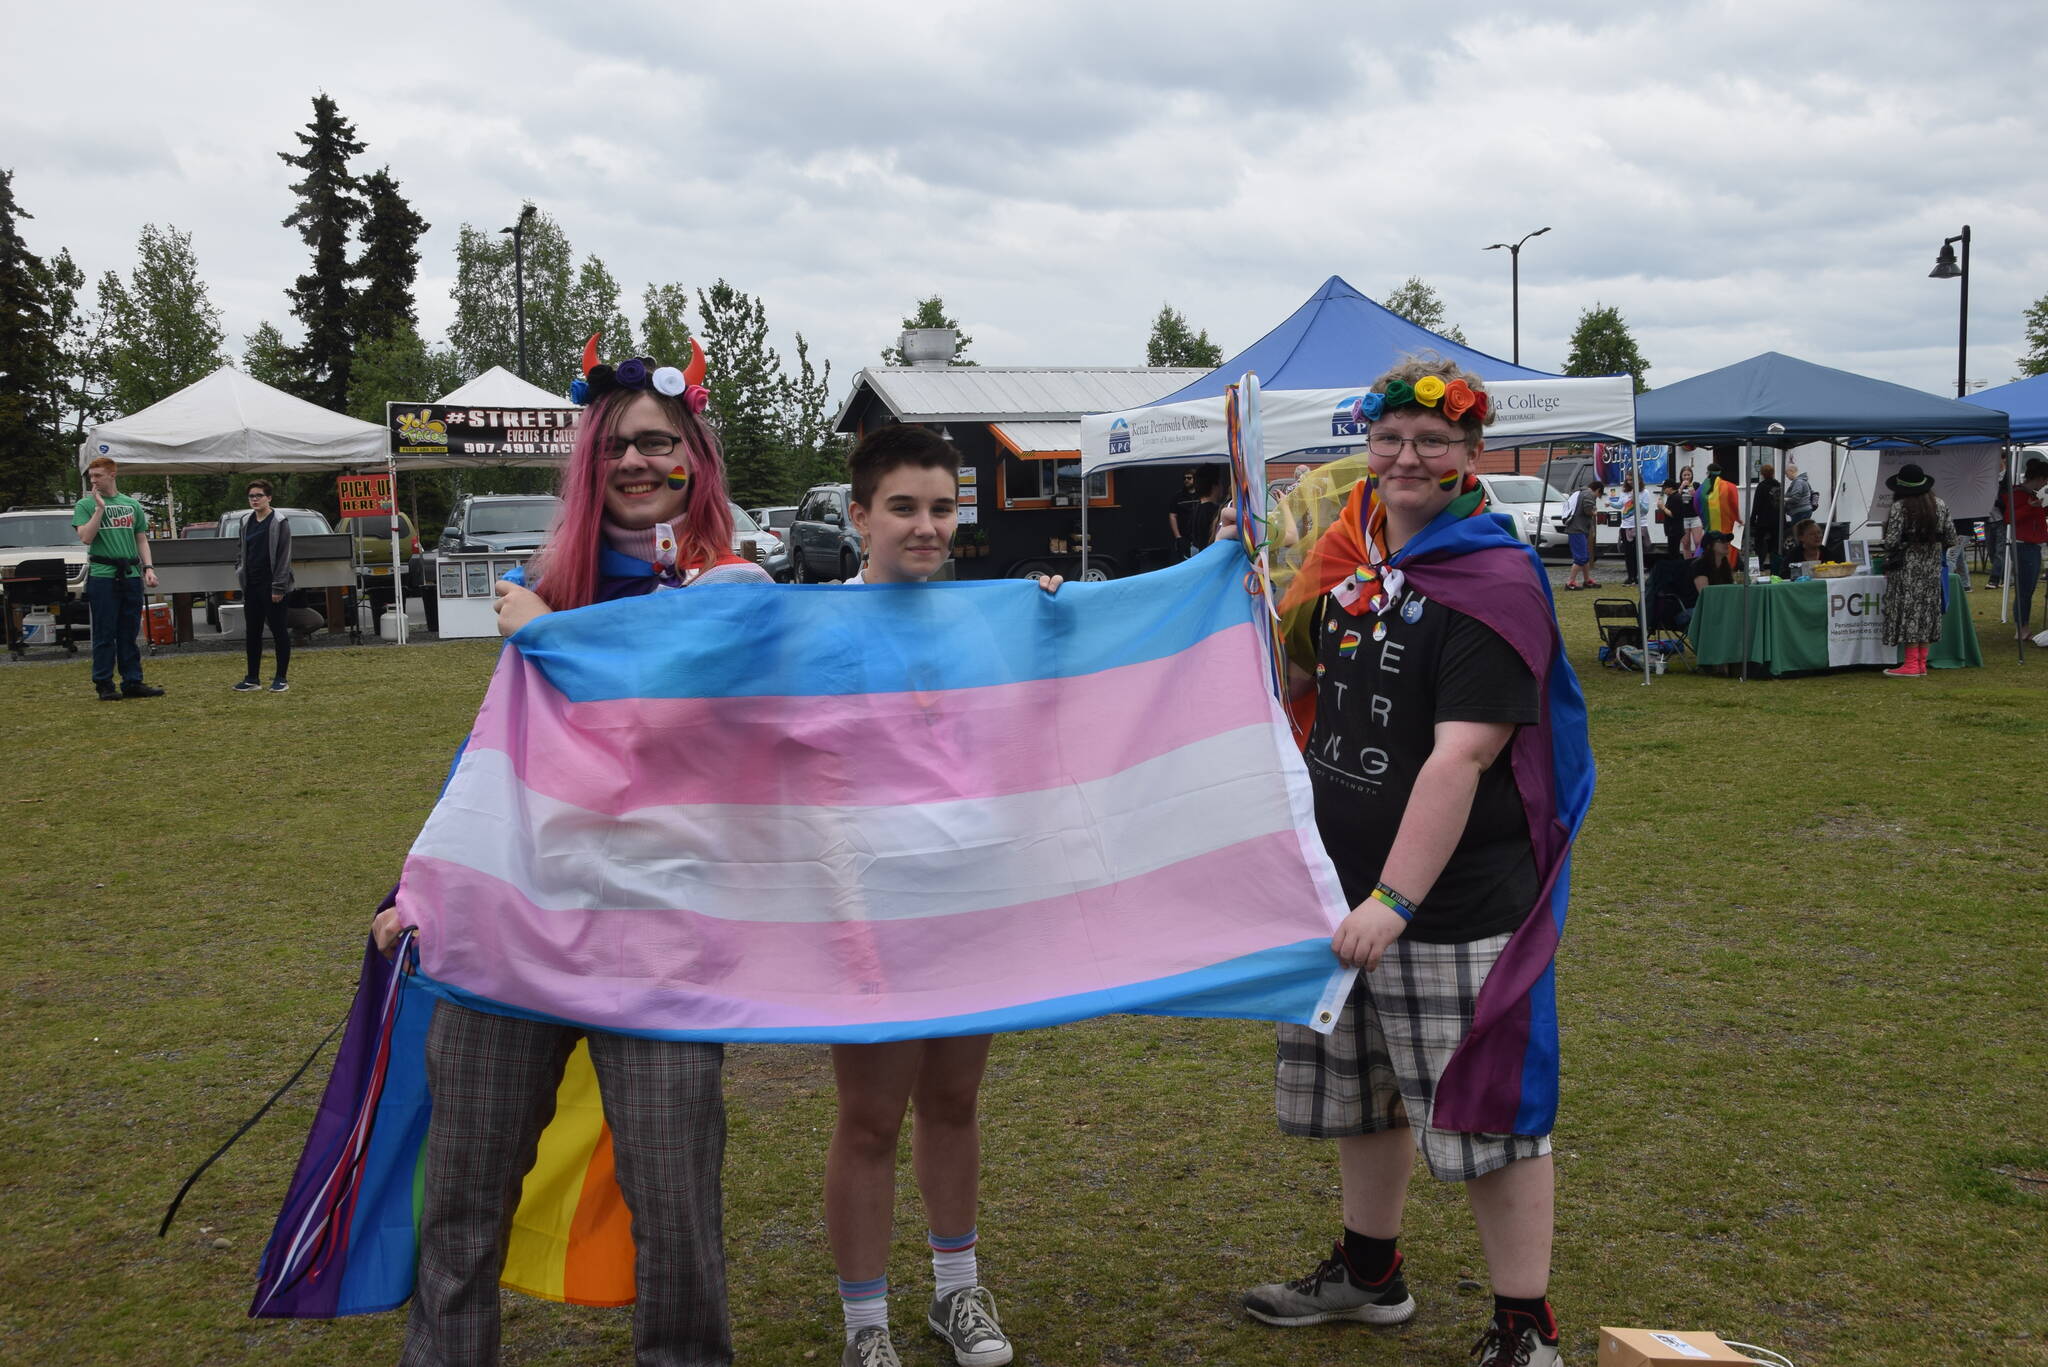 From left, Timmy Opheim, Jacey Kosto and Charlie Rogers hold up the Trans Pride Flag during the 2019 Soldotna Pride Celebration in Soldotna Creek Park on June 15, 2019. (Photo by Brian Mazurek/Peninsula Clarion)